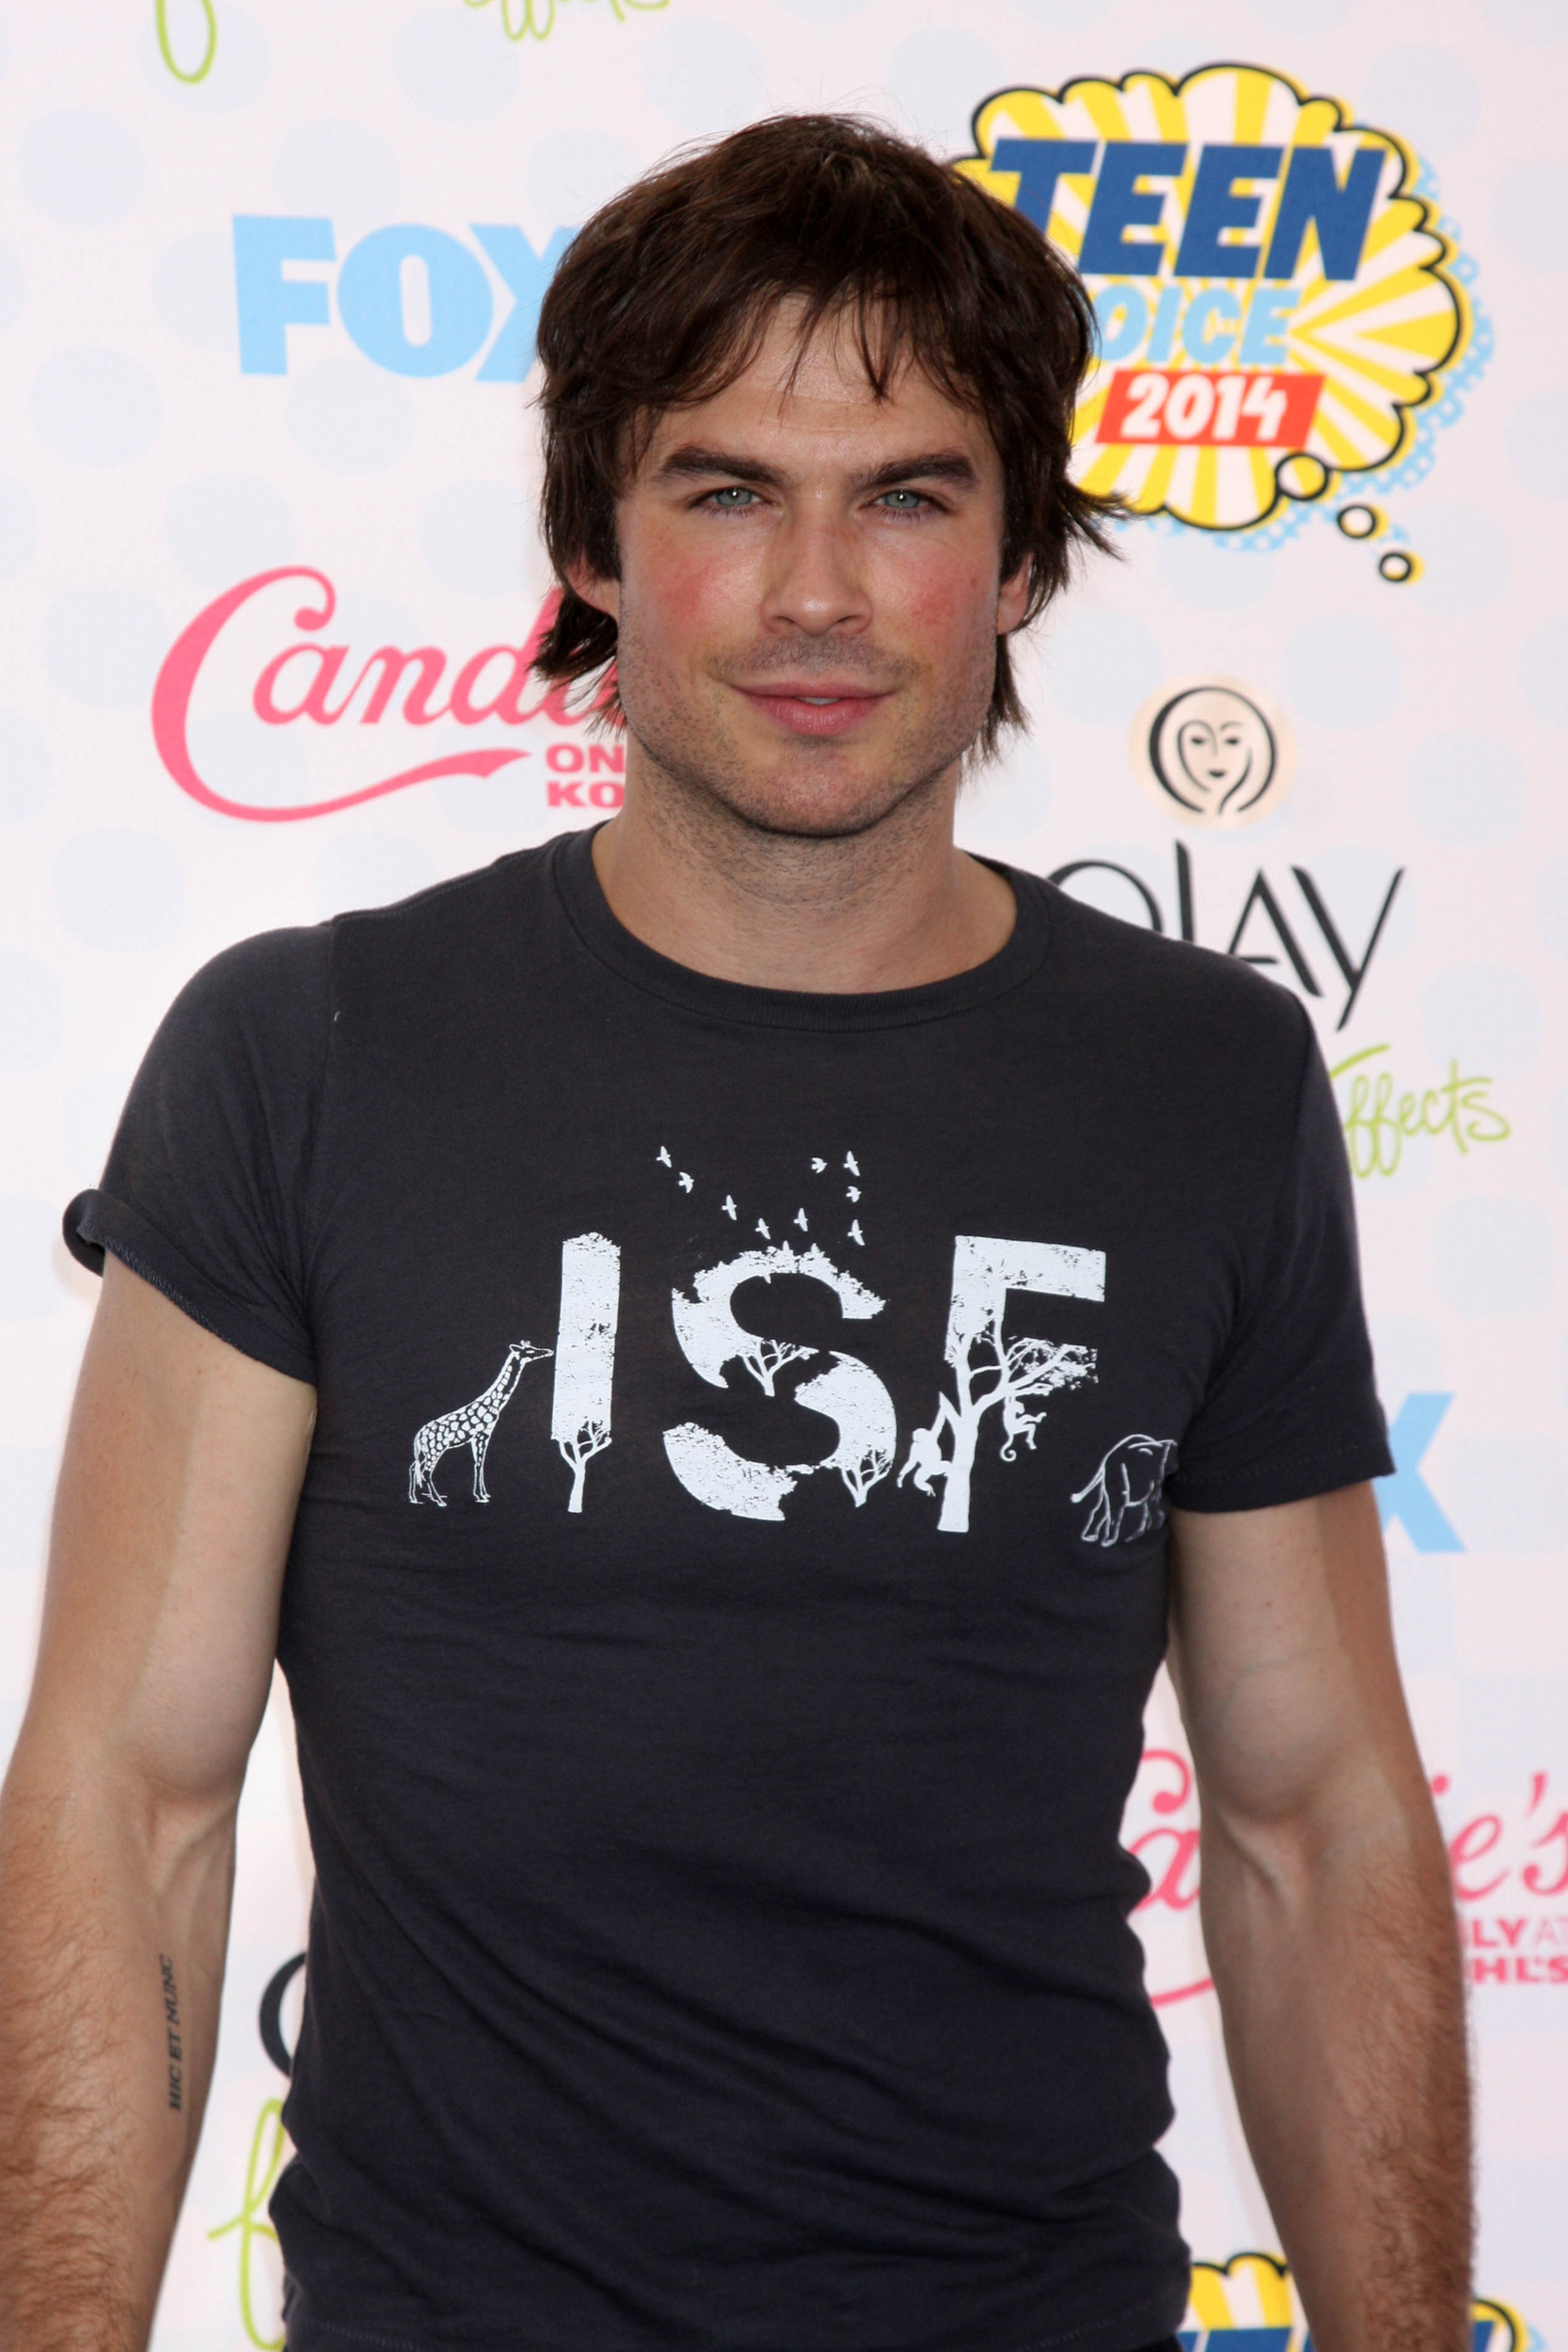 How many tattoos does ian somerhalder have